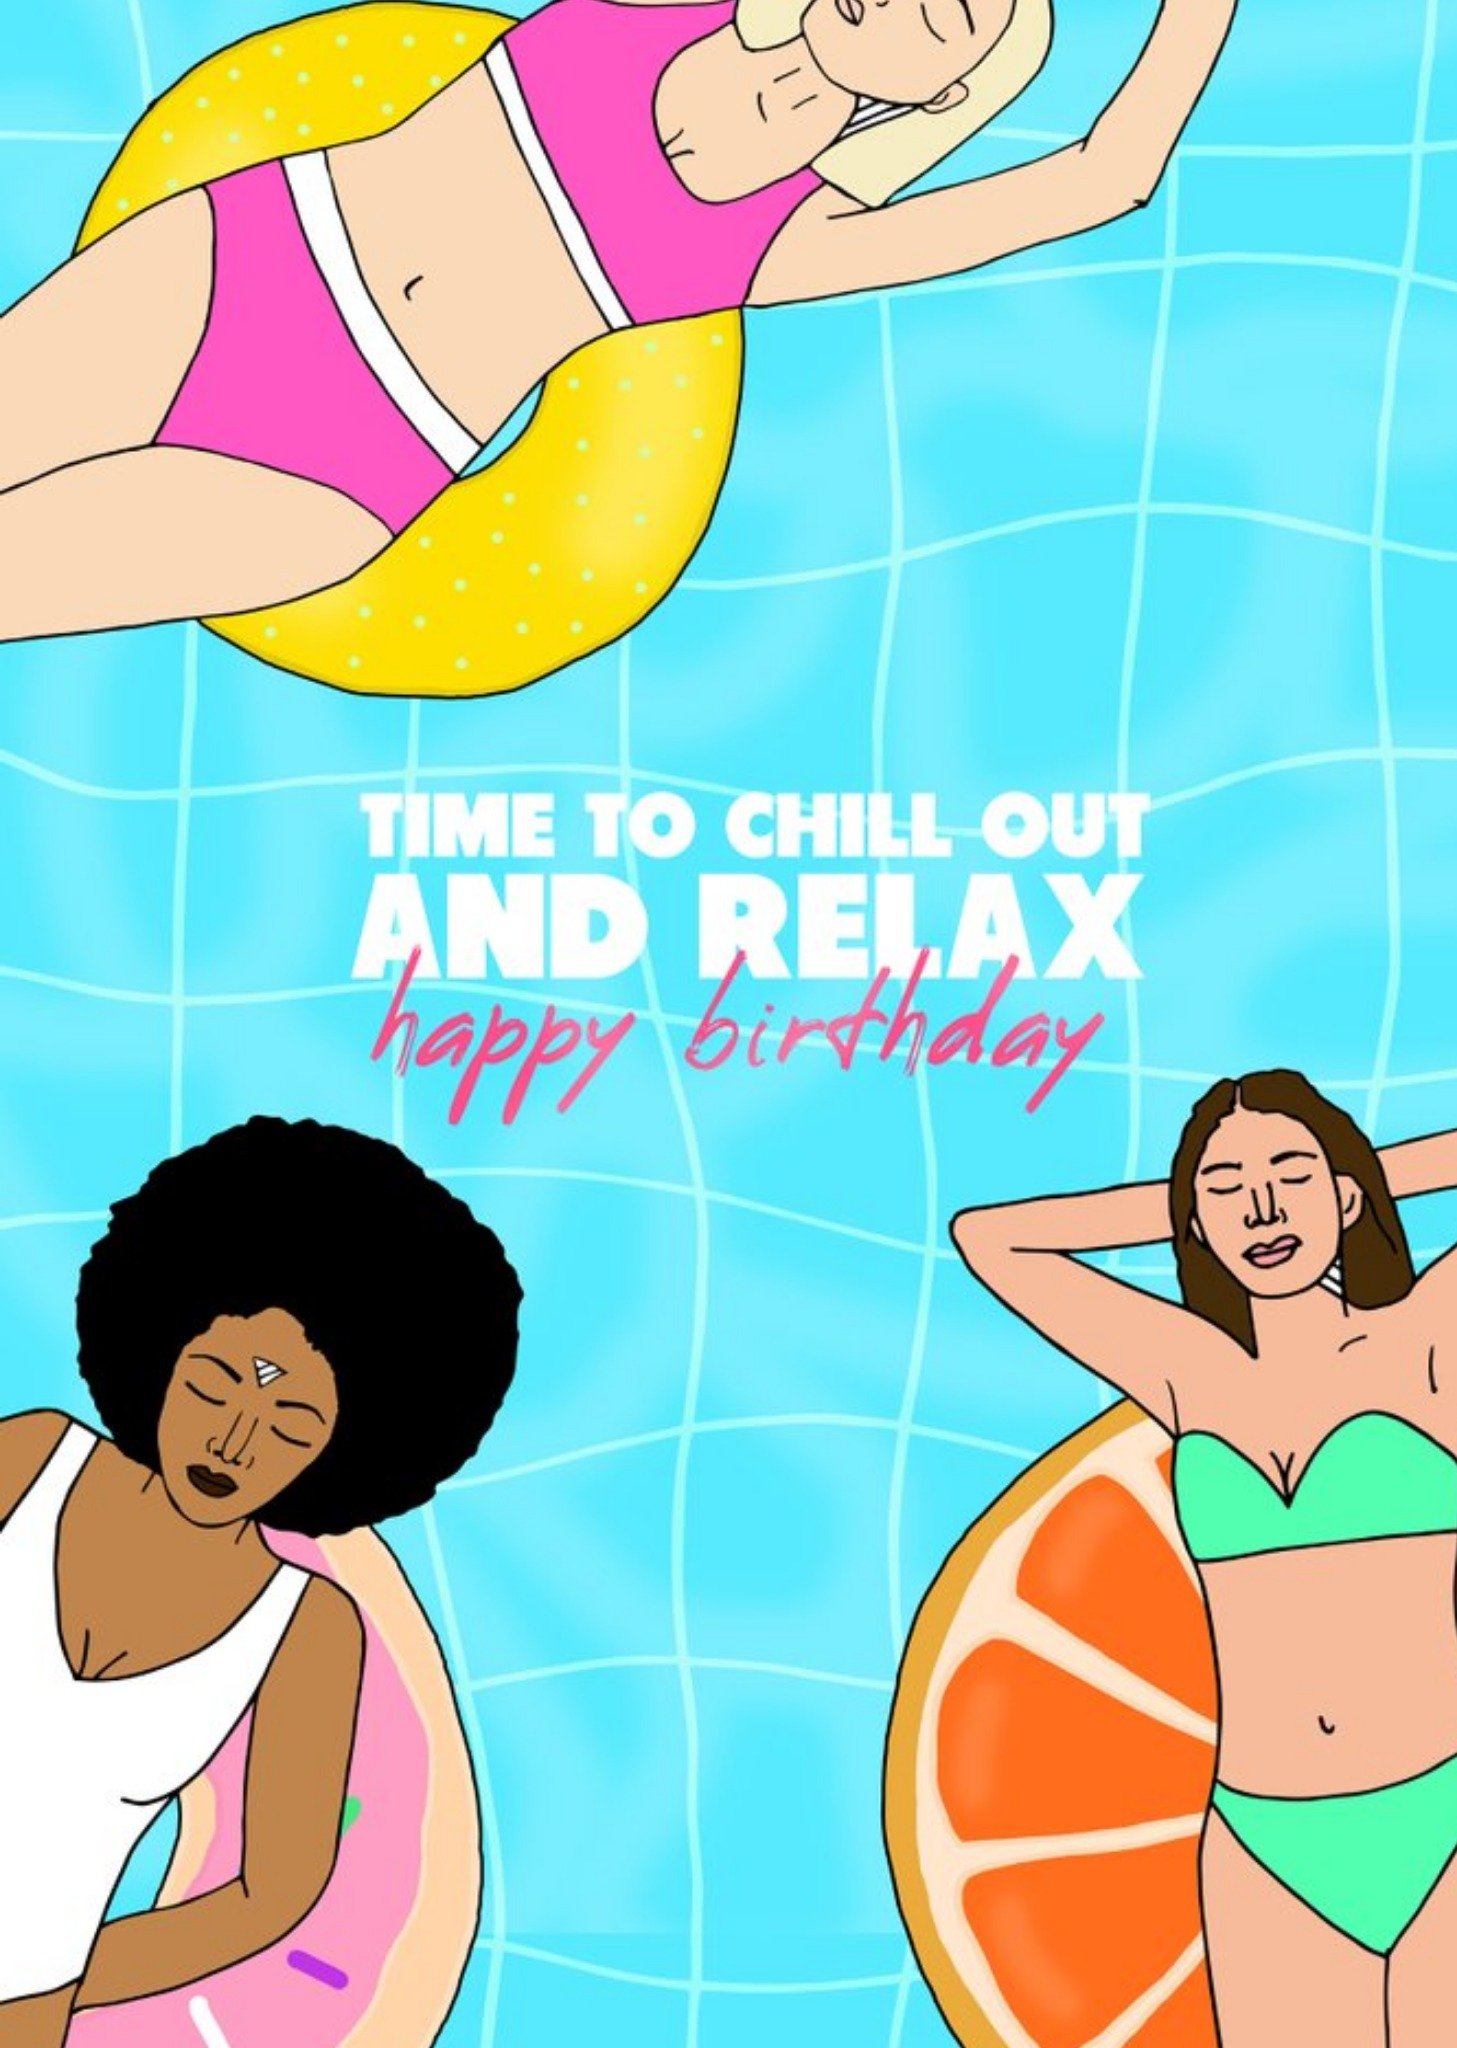 Moonpig Illustration Time To Chill Out And Relax Happy Birthday Card Ecard